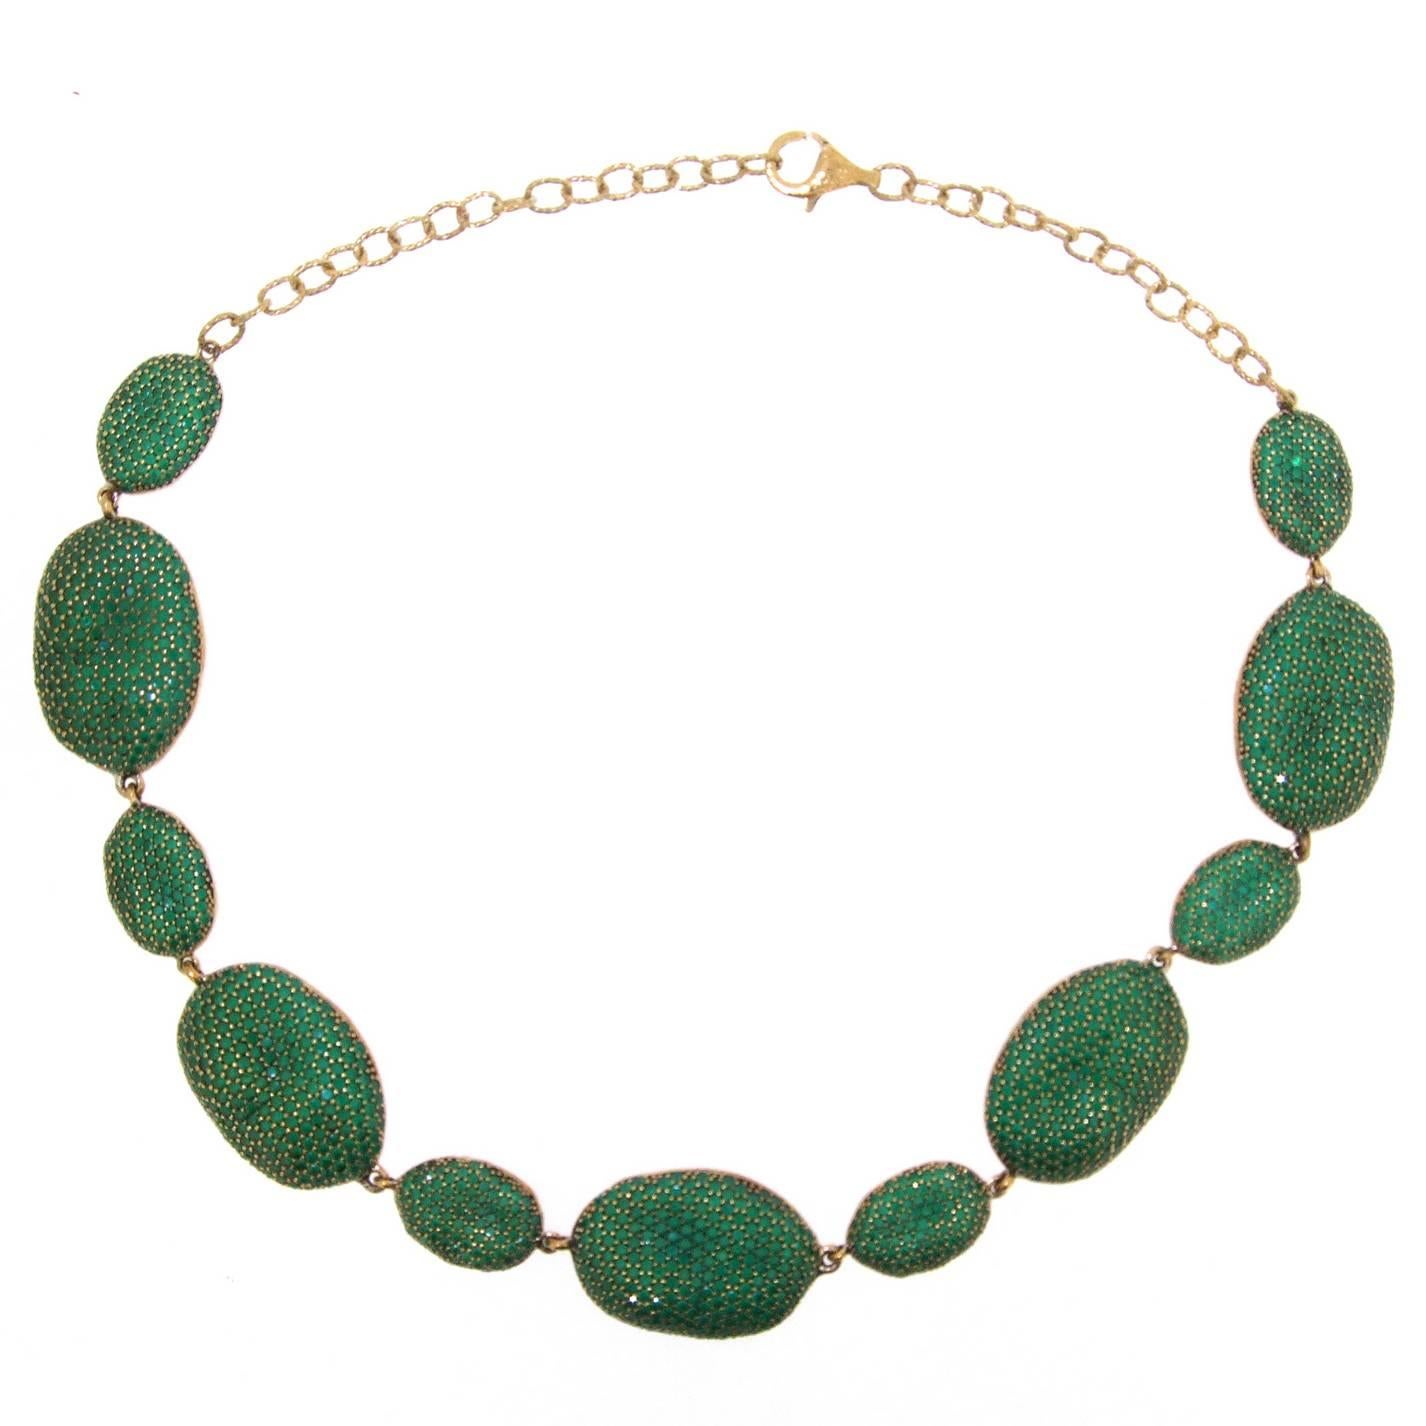 Emerald Green Rococo Pebble Necklace by JCM London